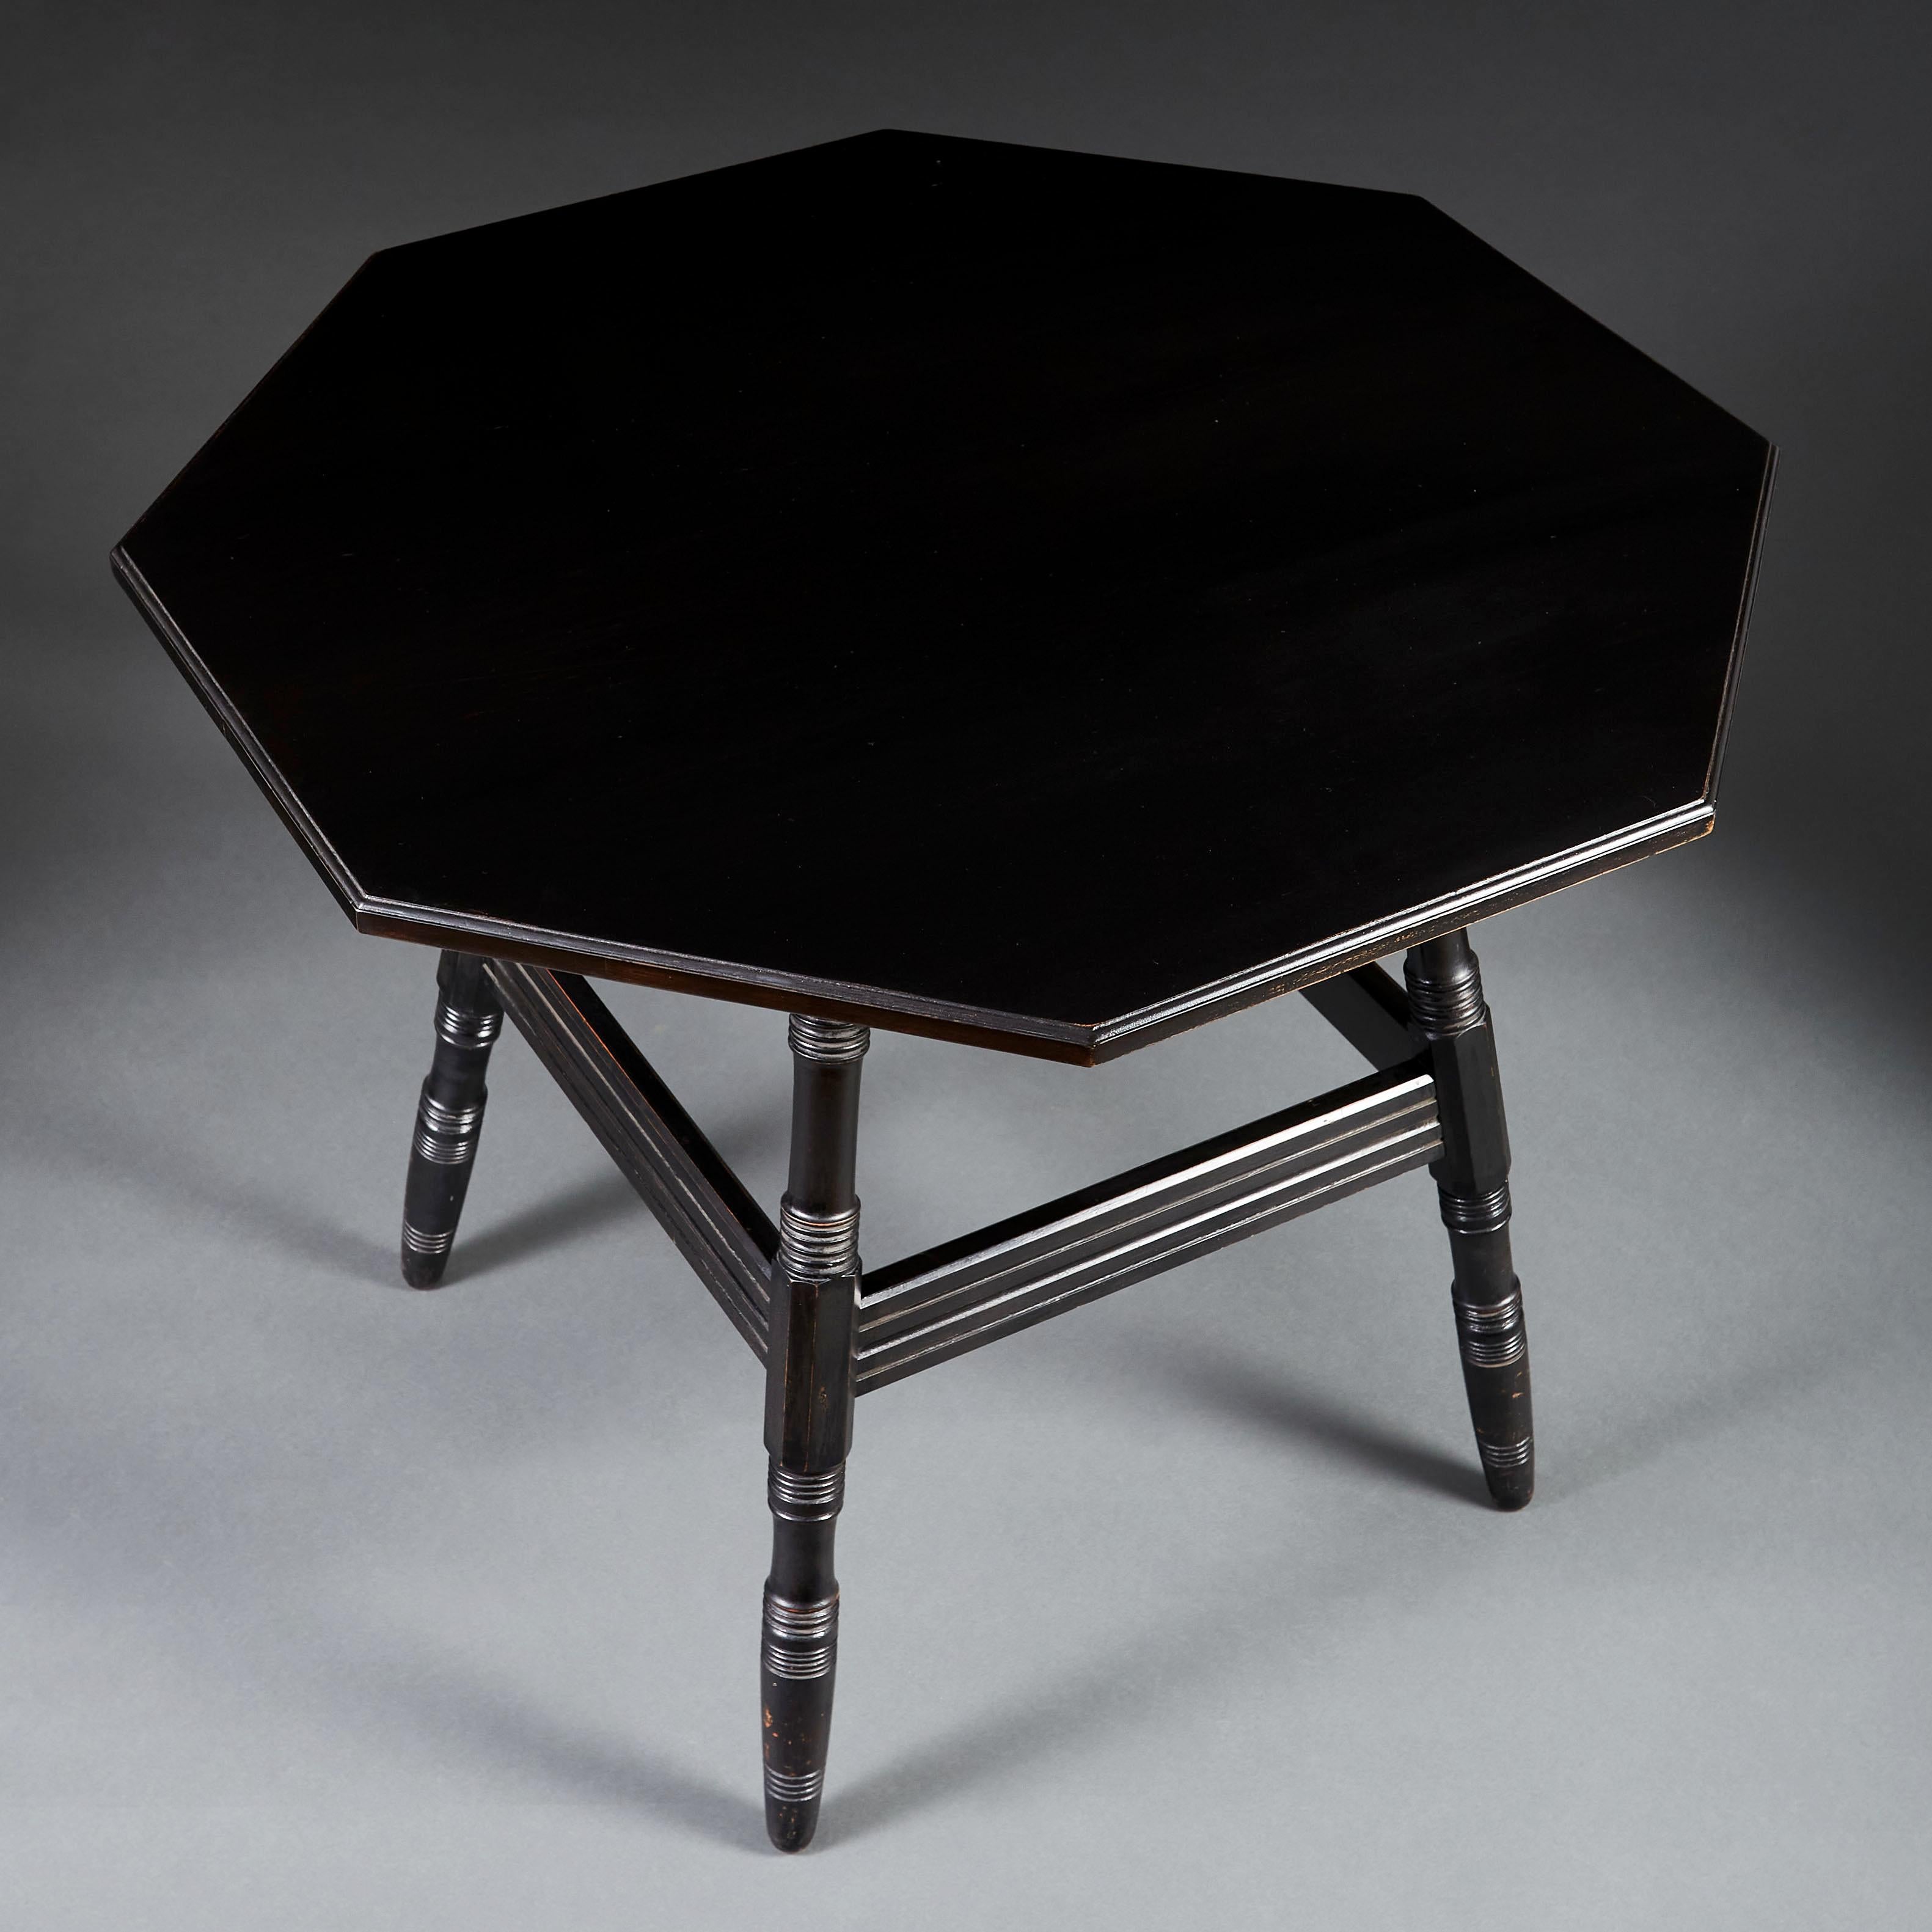 An ebonised Arts & Crafts centre table of octagonal form with turned legs and stretchers, in the manner of Philip Webb.

Philip Webb (1831 – 1915) was a talented and versatile designer who not only created buildings and furniture but also